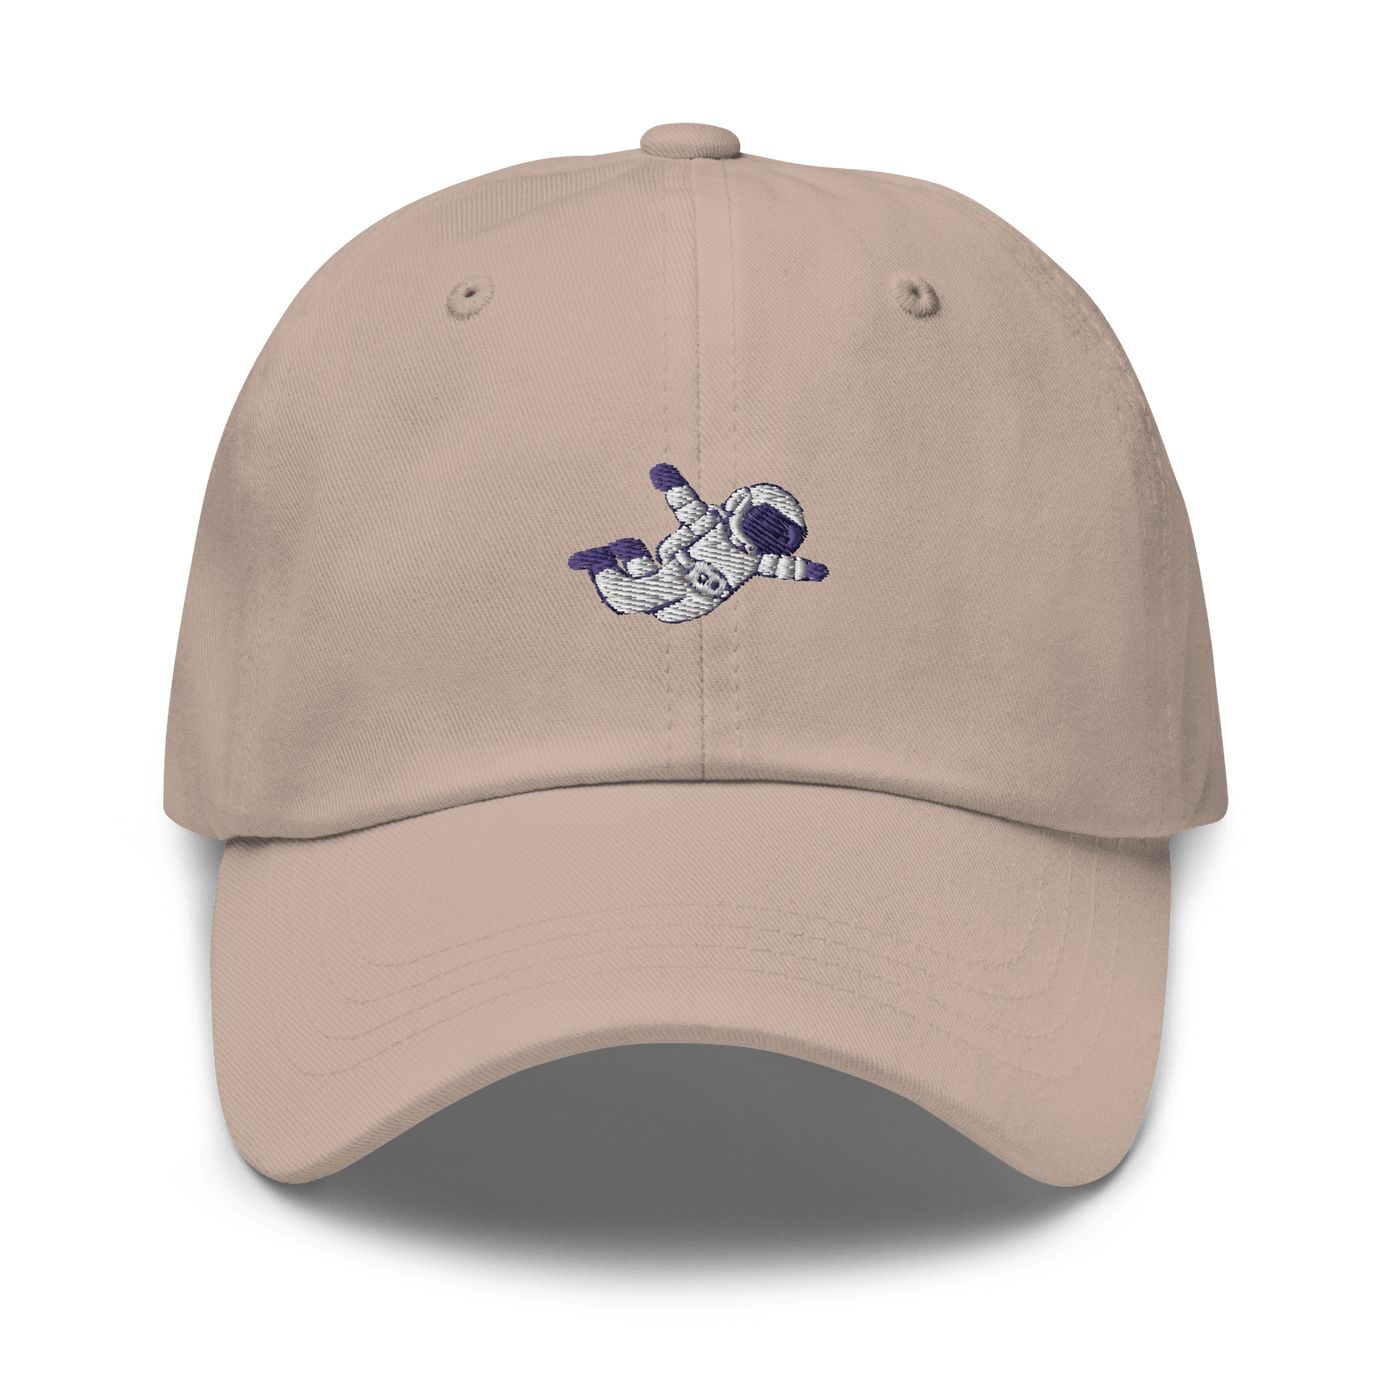 Astronaut Dad hat - Stone - - Just Another Cap Store